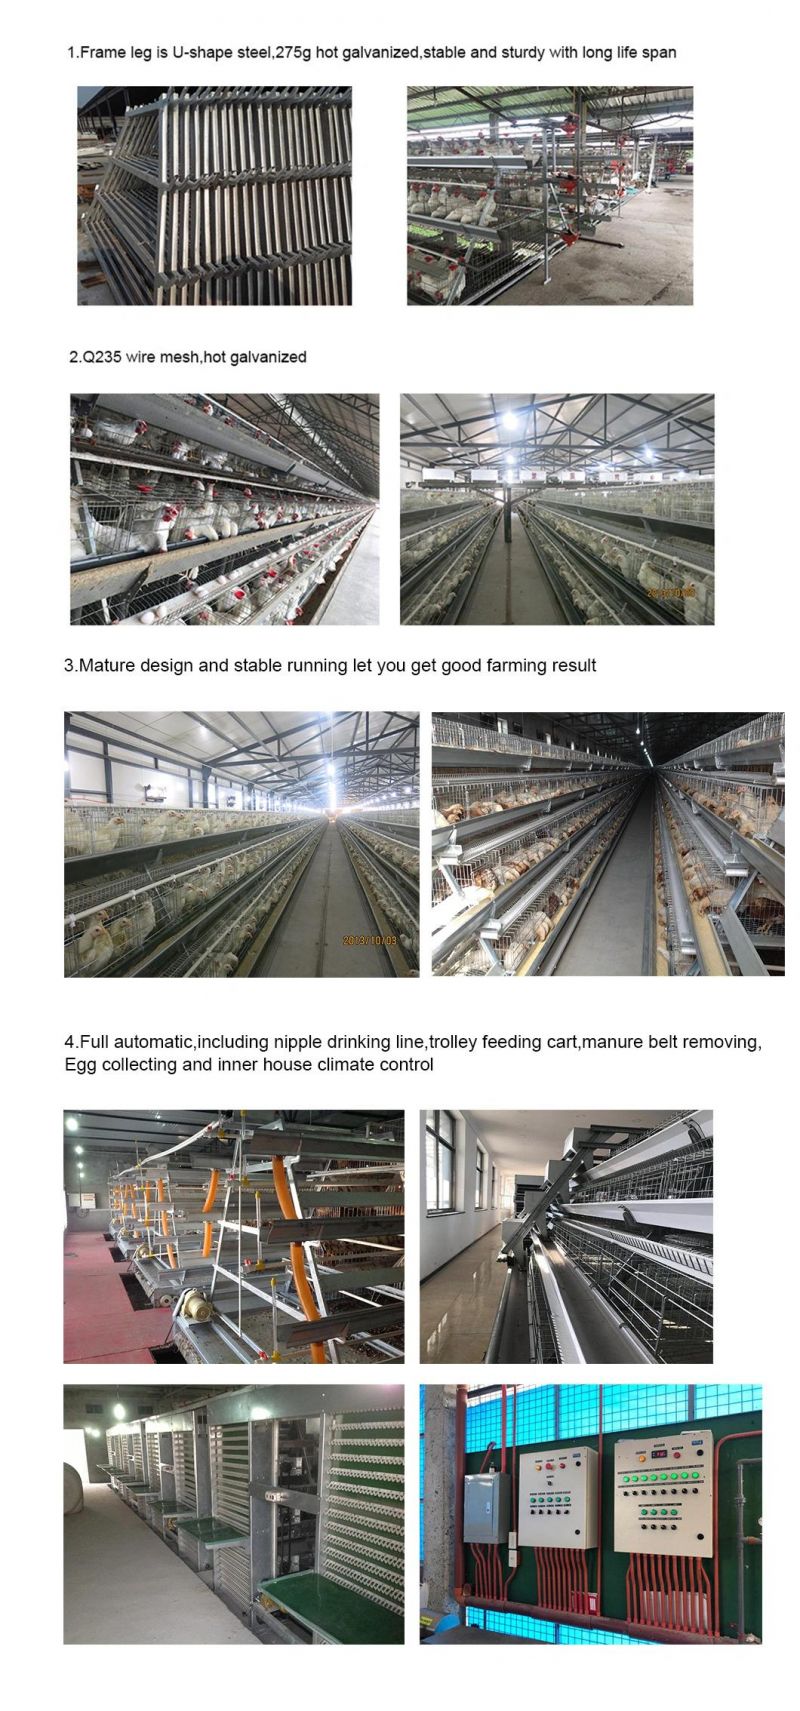 Longfeng Electric Poultry Equipment for a Type of Layer Cage with High Quality